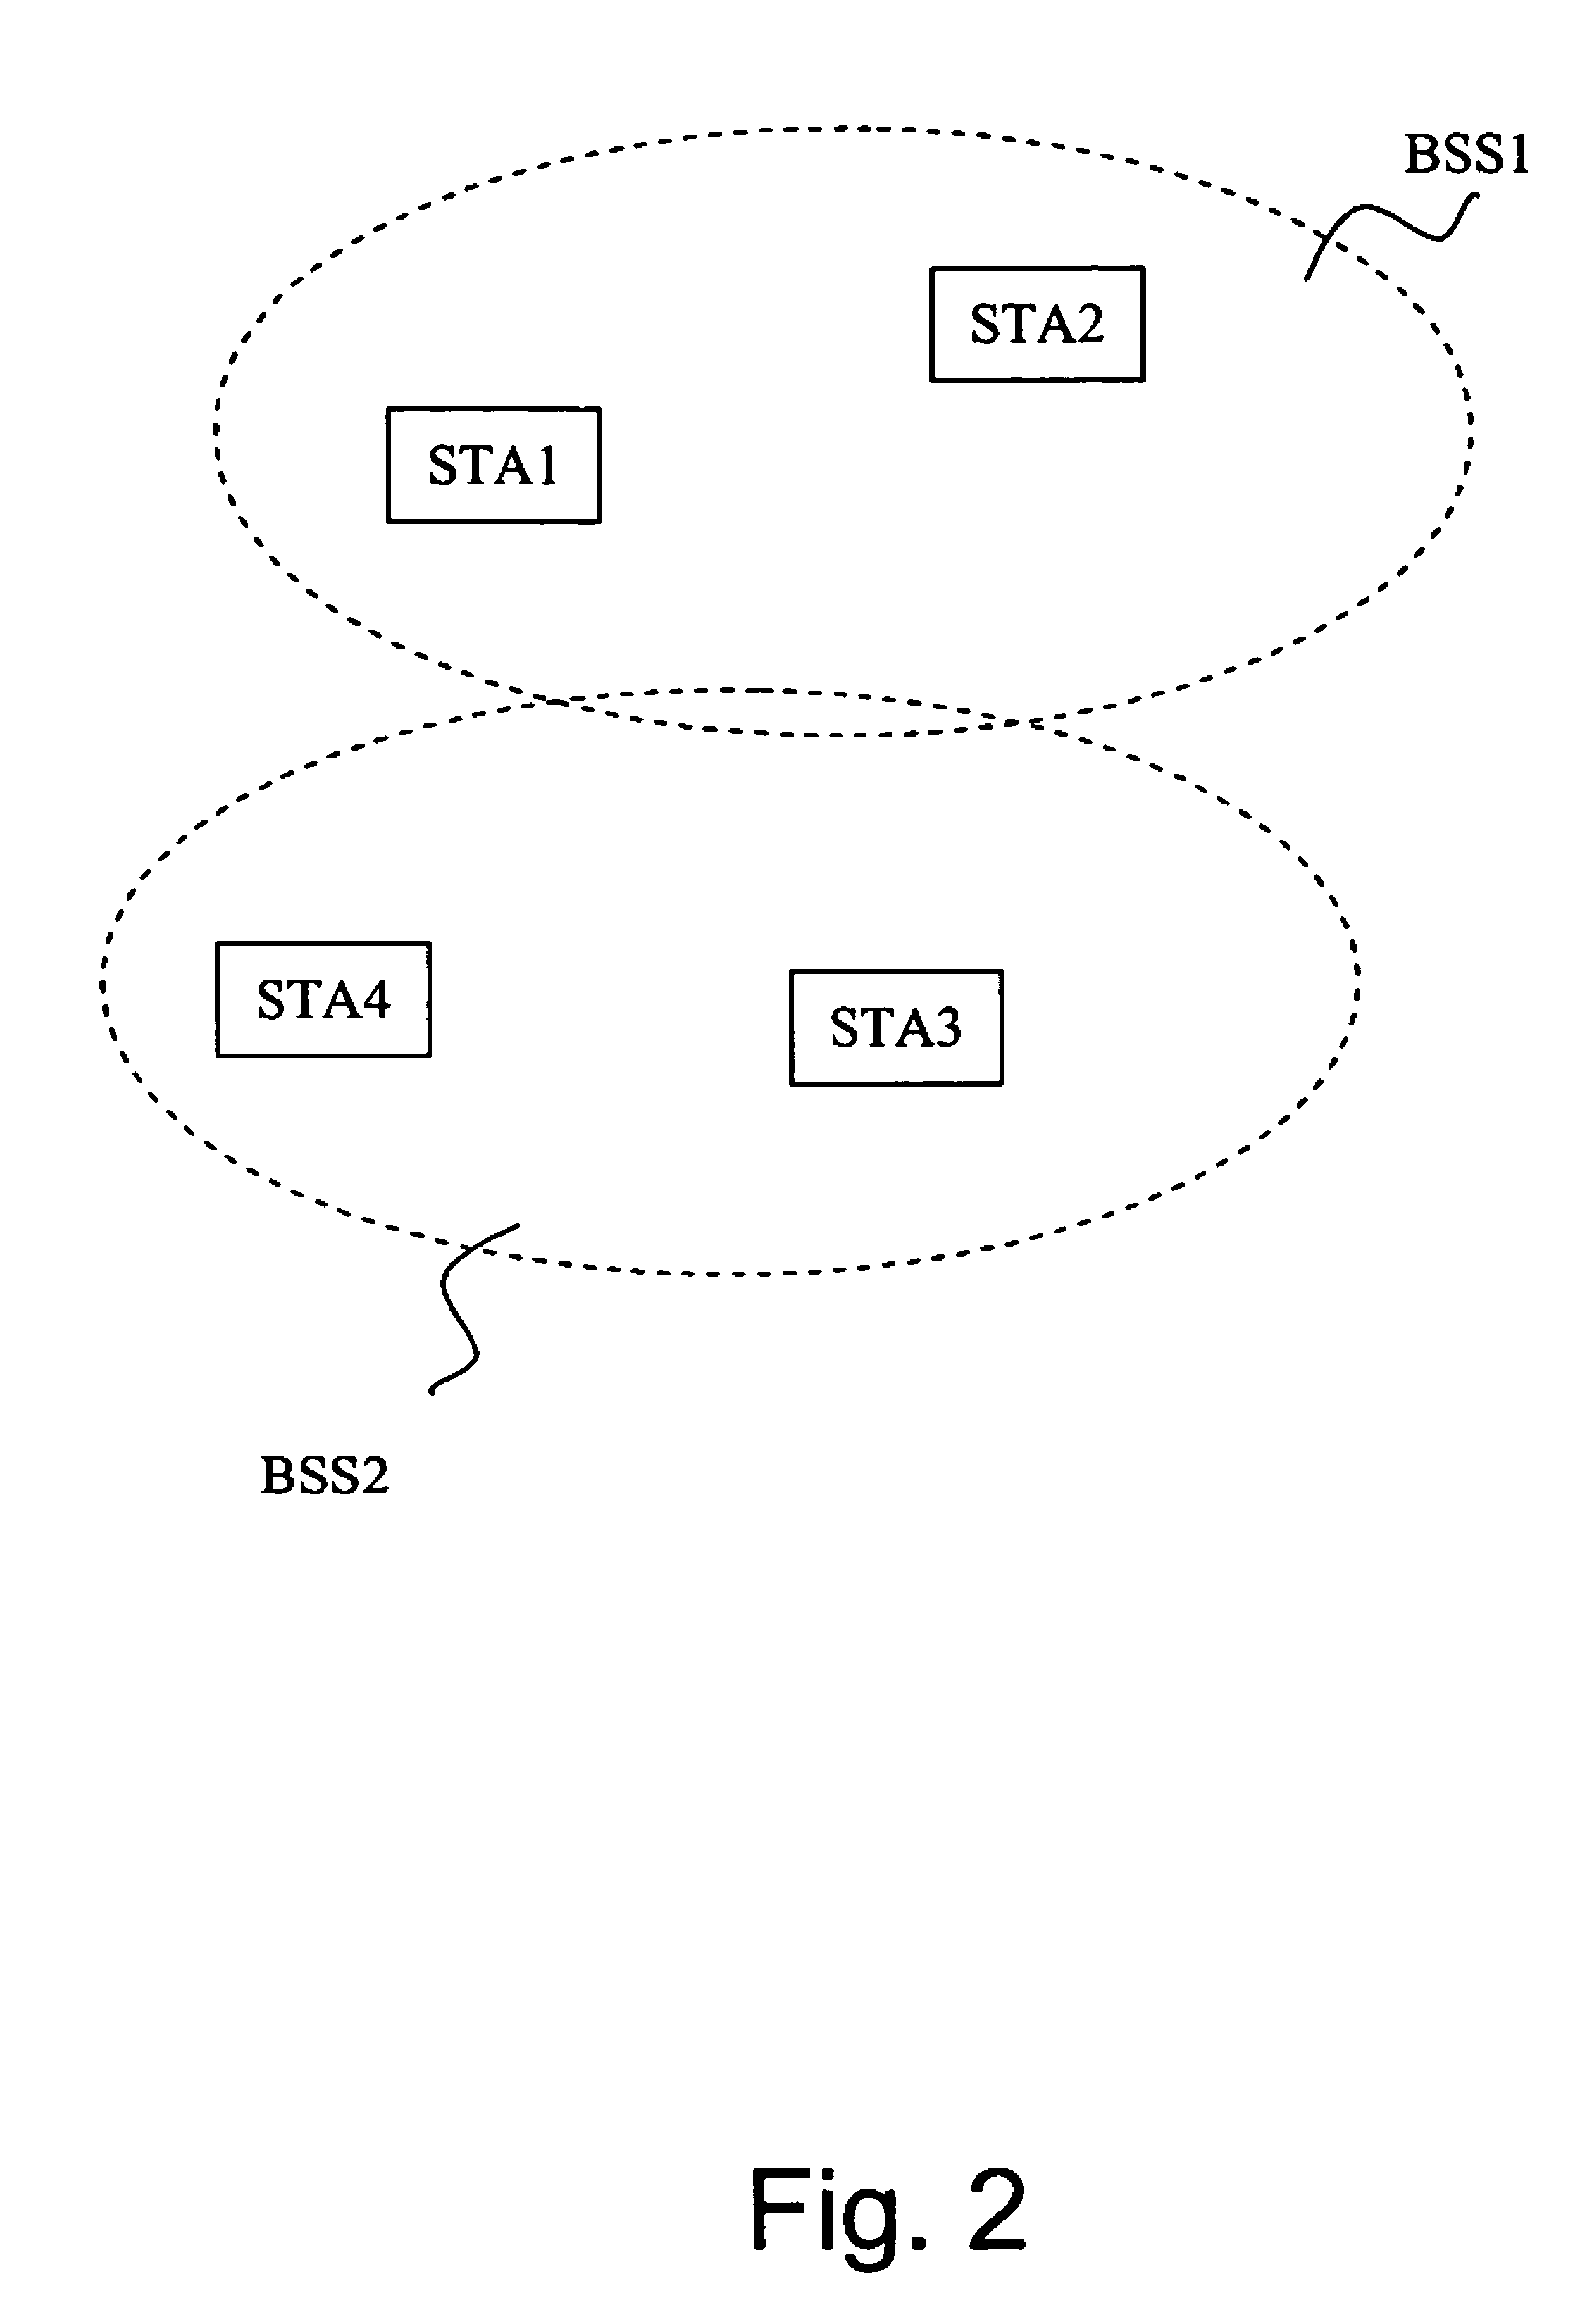 Method for dynamically selecting a channel in a wireless local area network